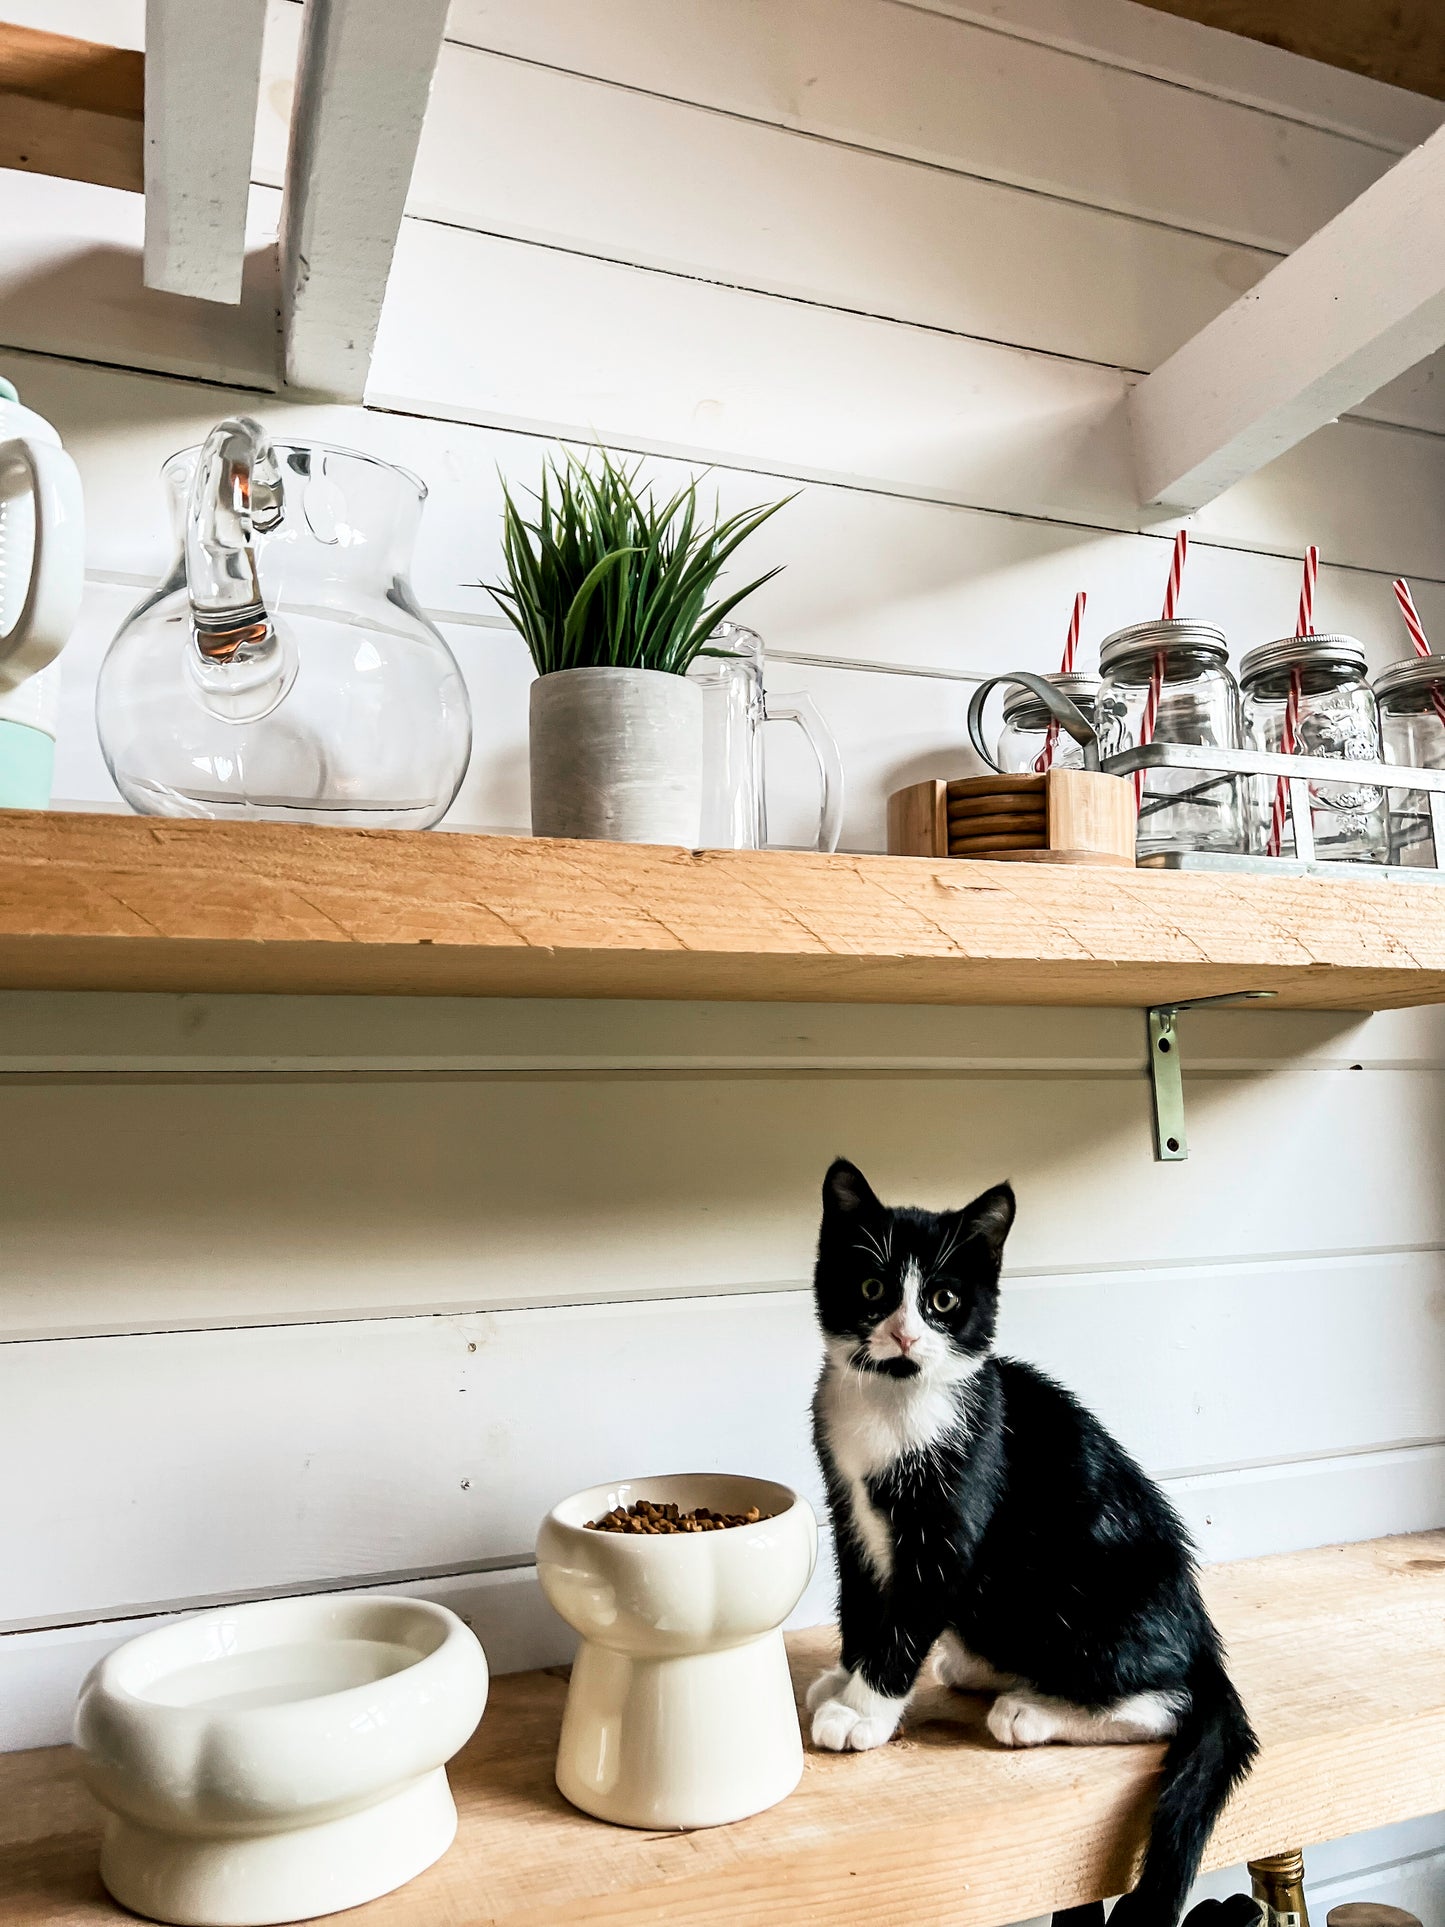 Lifestyle Cat with Bloire Creamy Bowls